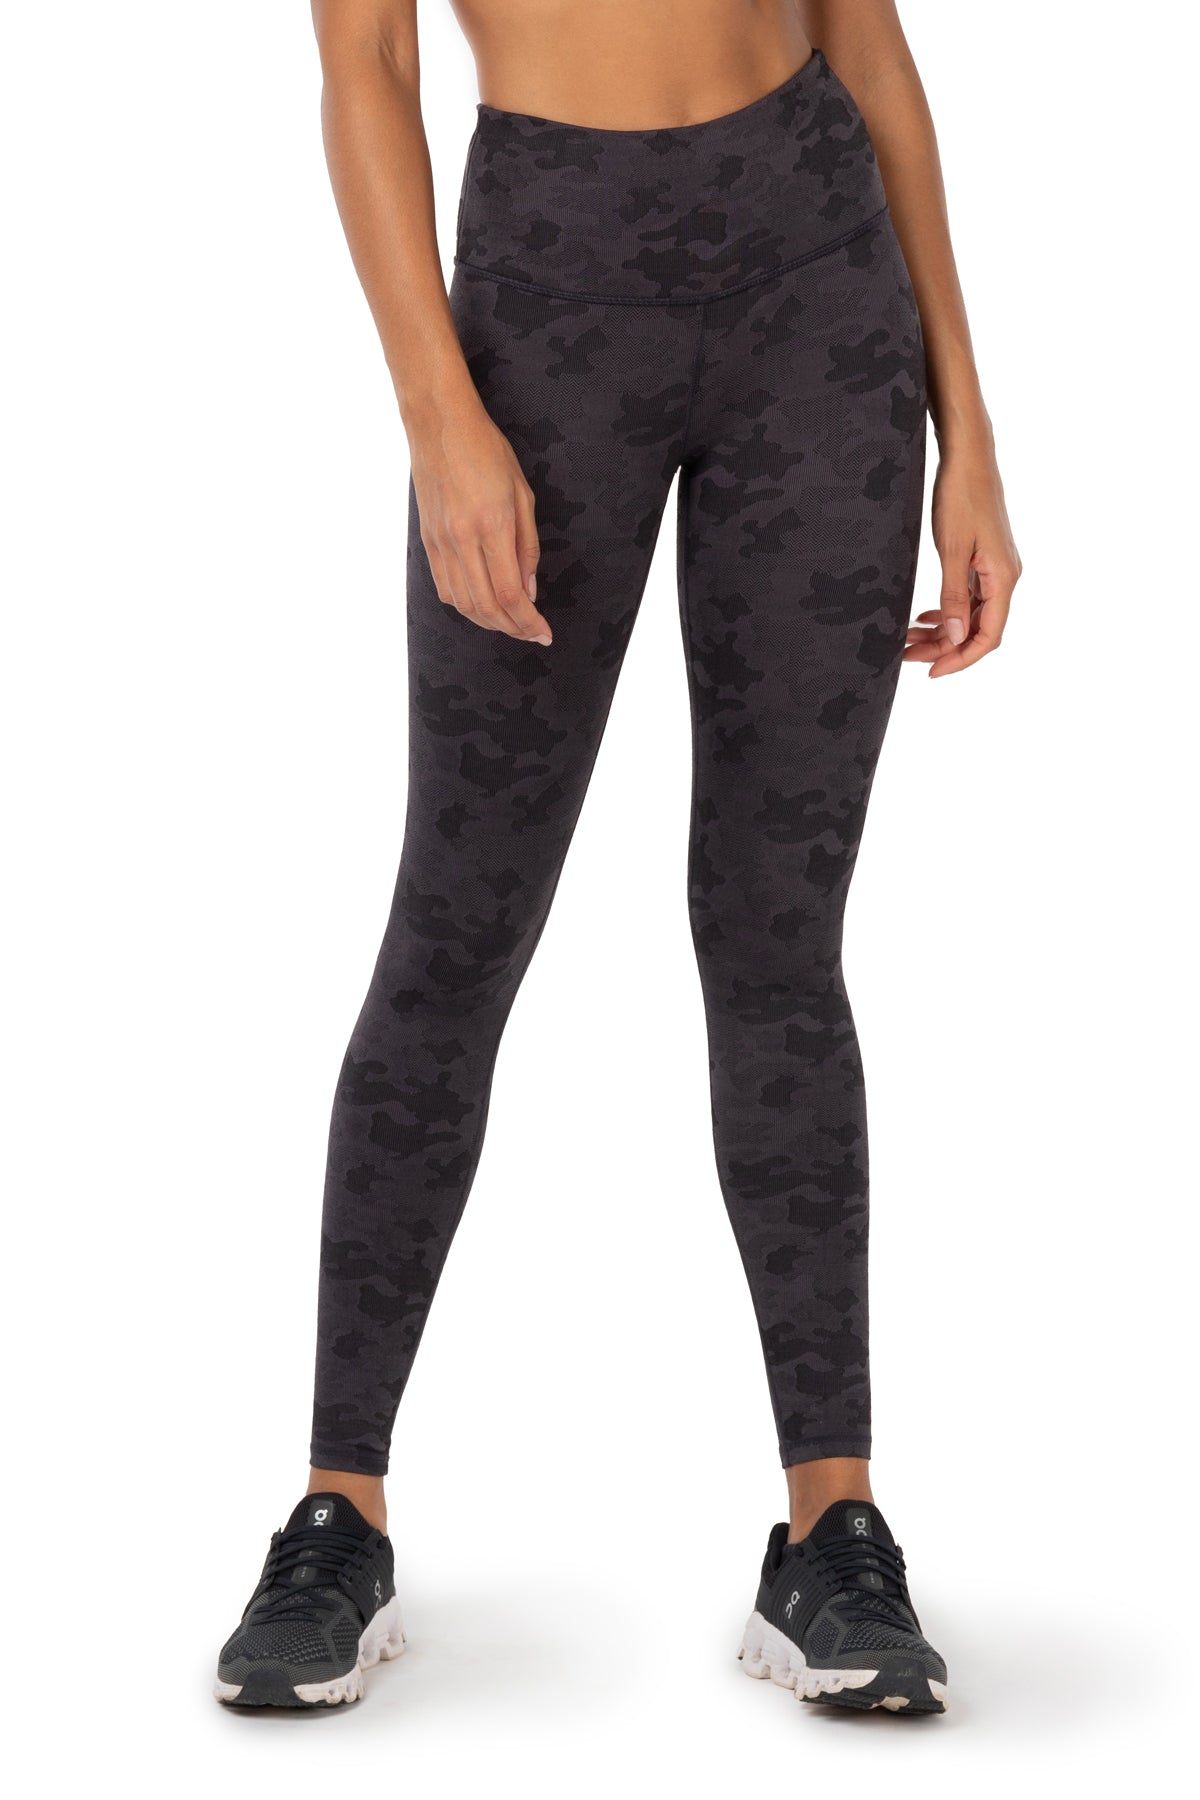 CRZ YOGA Women's Thermal Fleece Lined Leggings 25 Inches - High